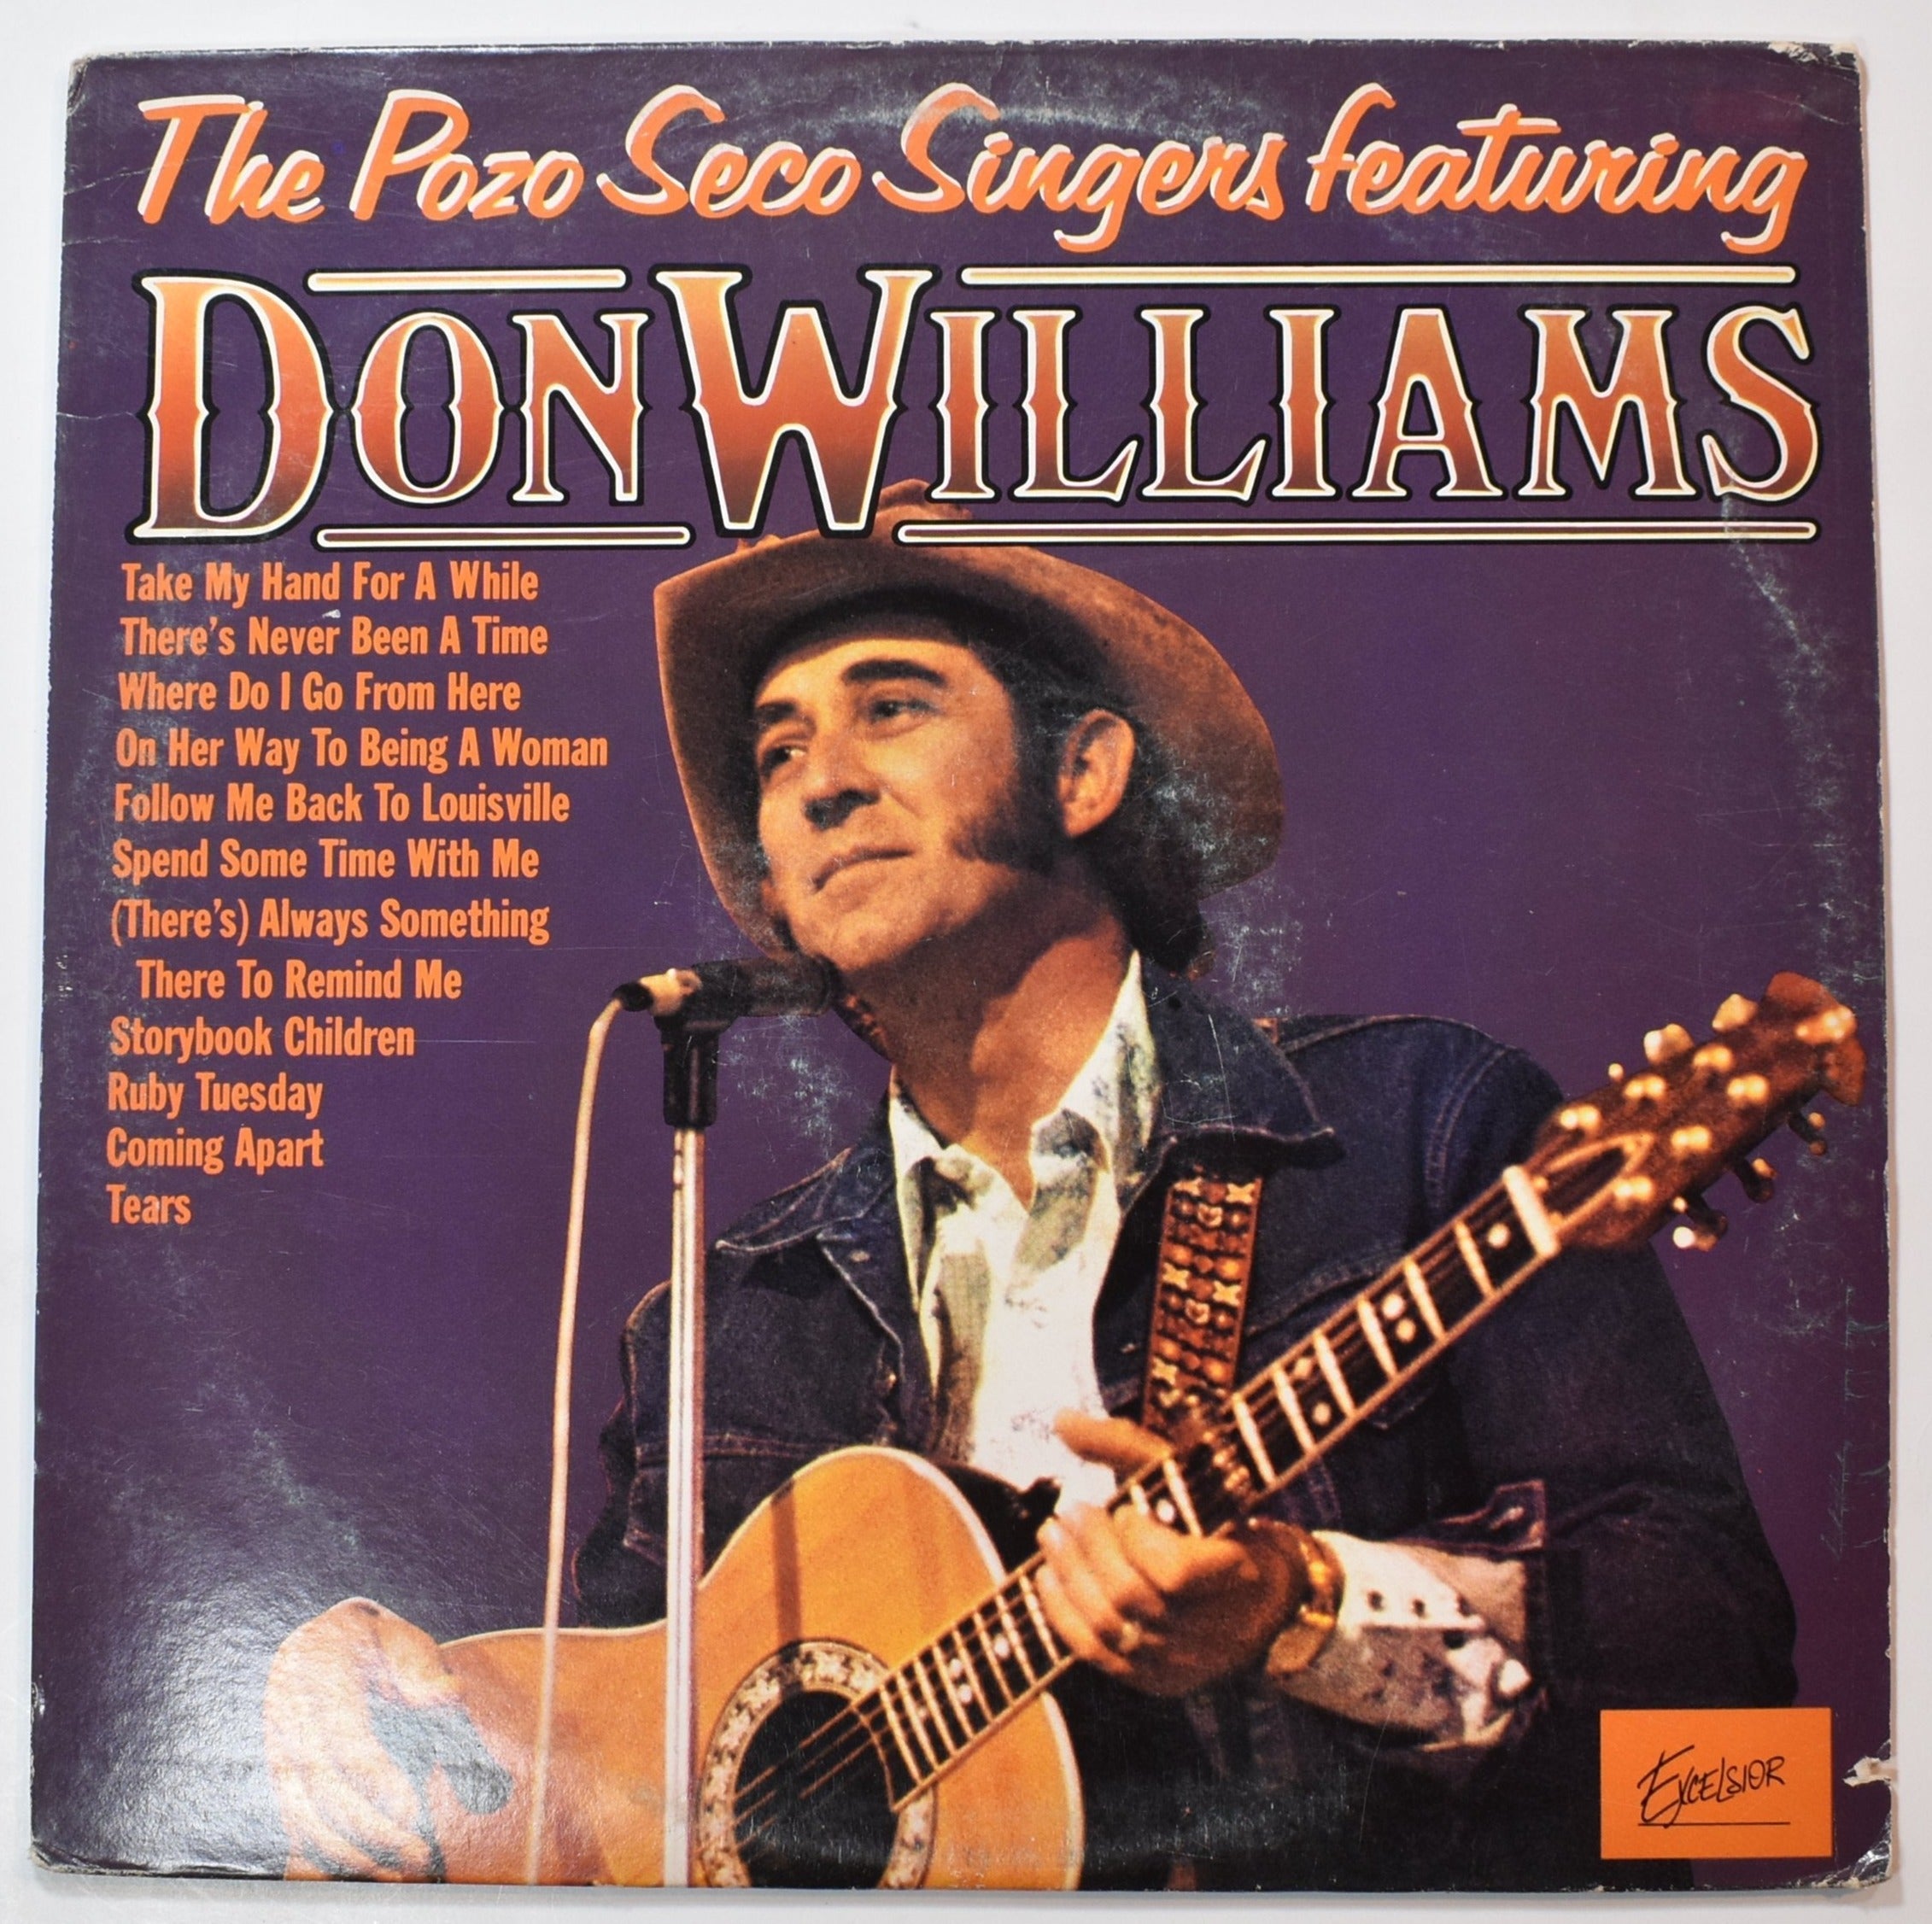 Vinyl Music Record The Pozo Seco Singers Featuring Don Williams record